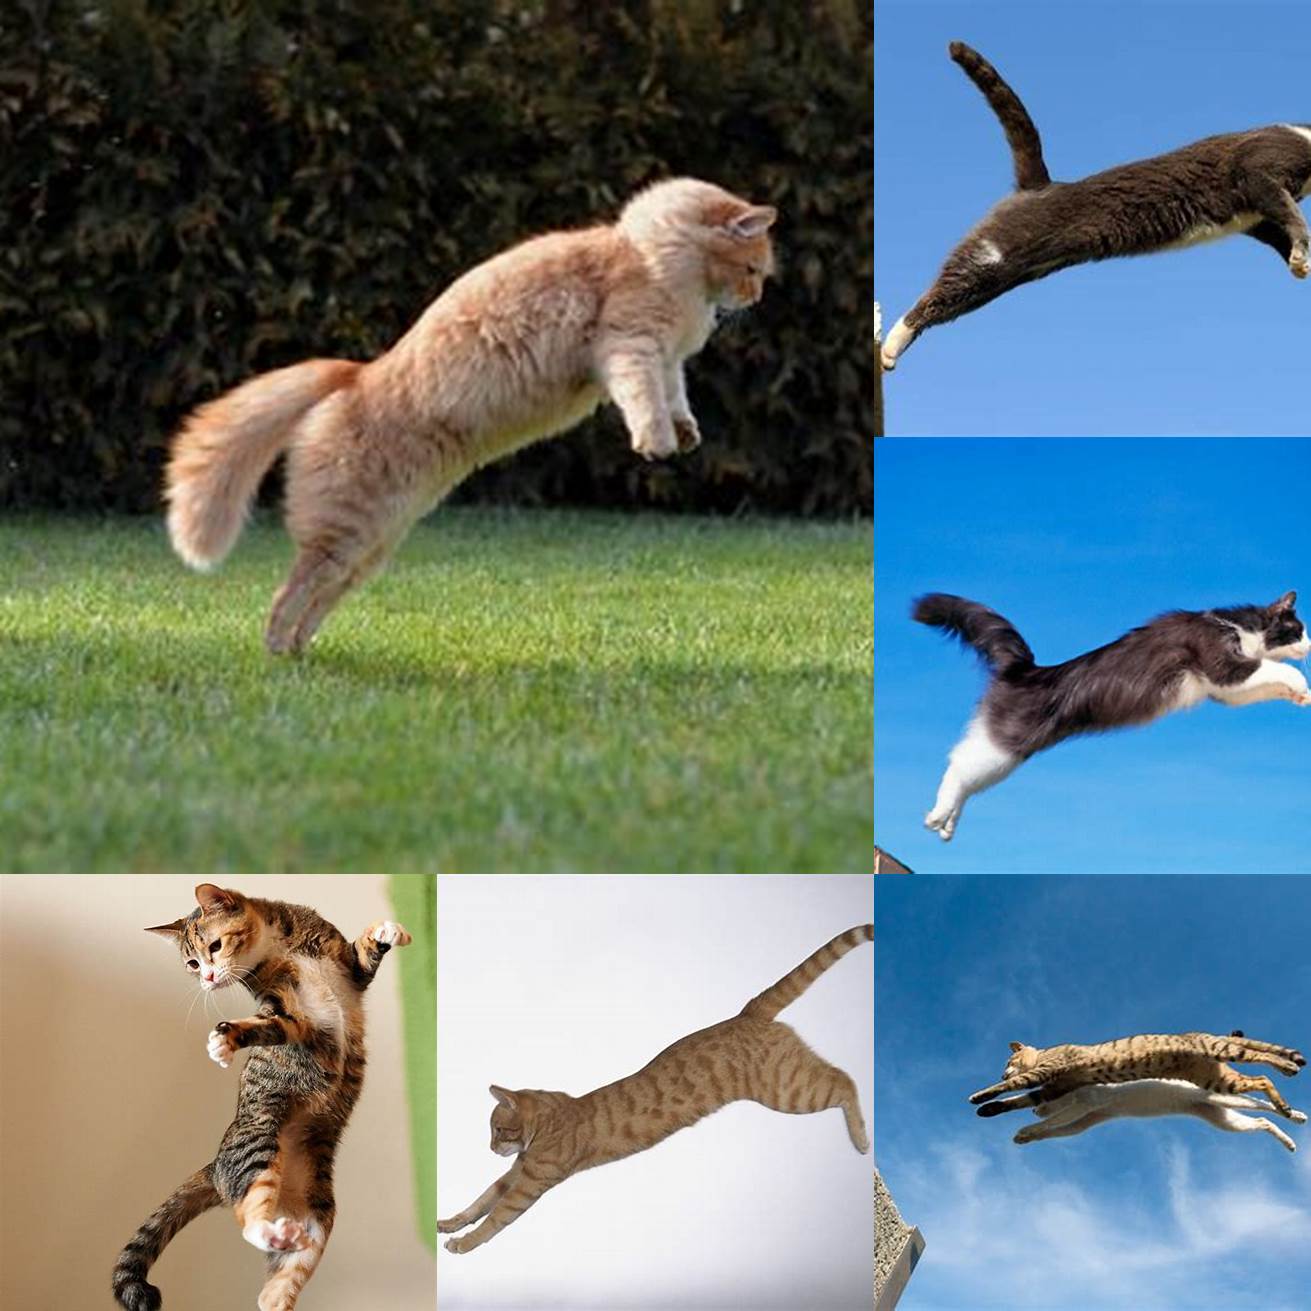 Cats are agile creatures that can jump up to six times their body length